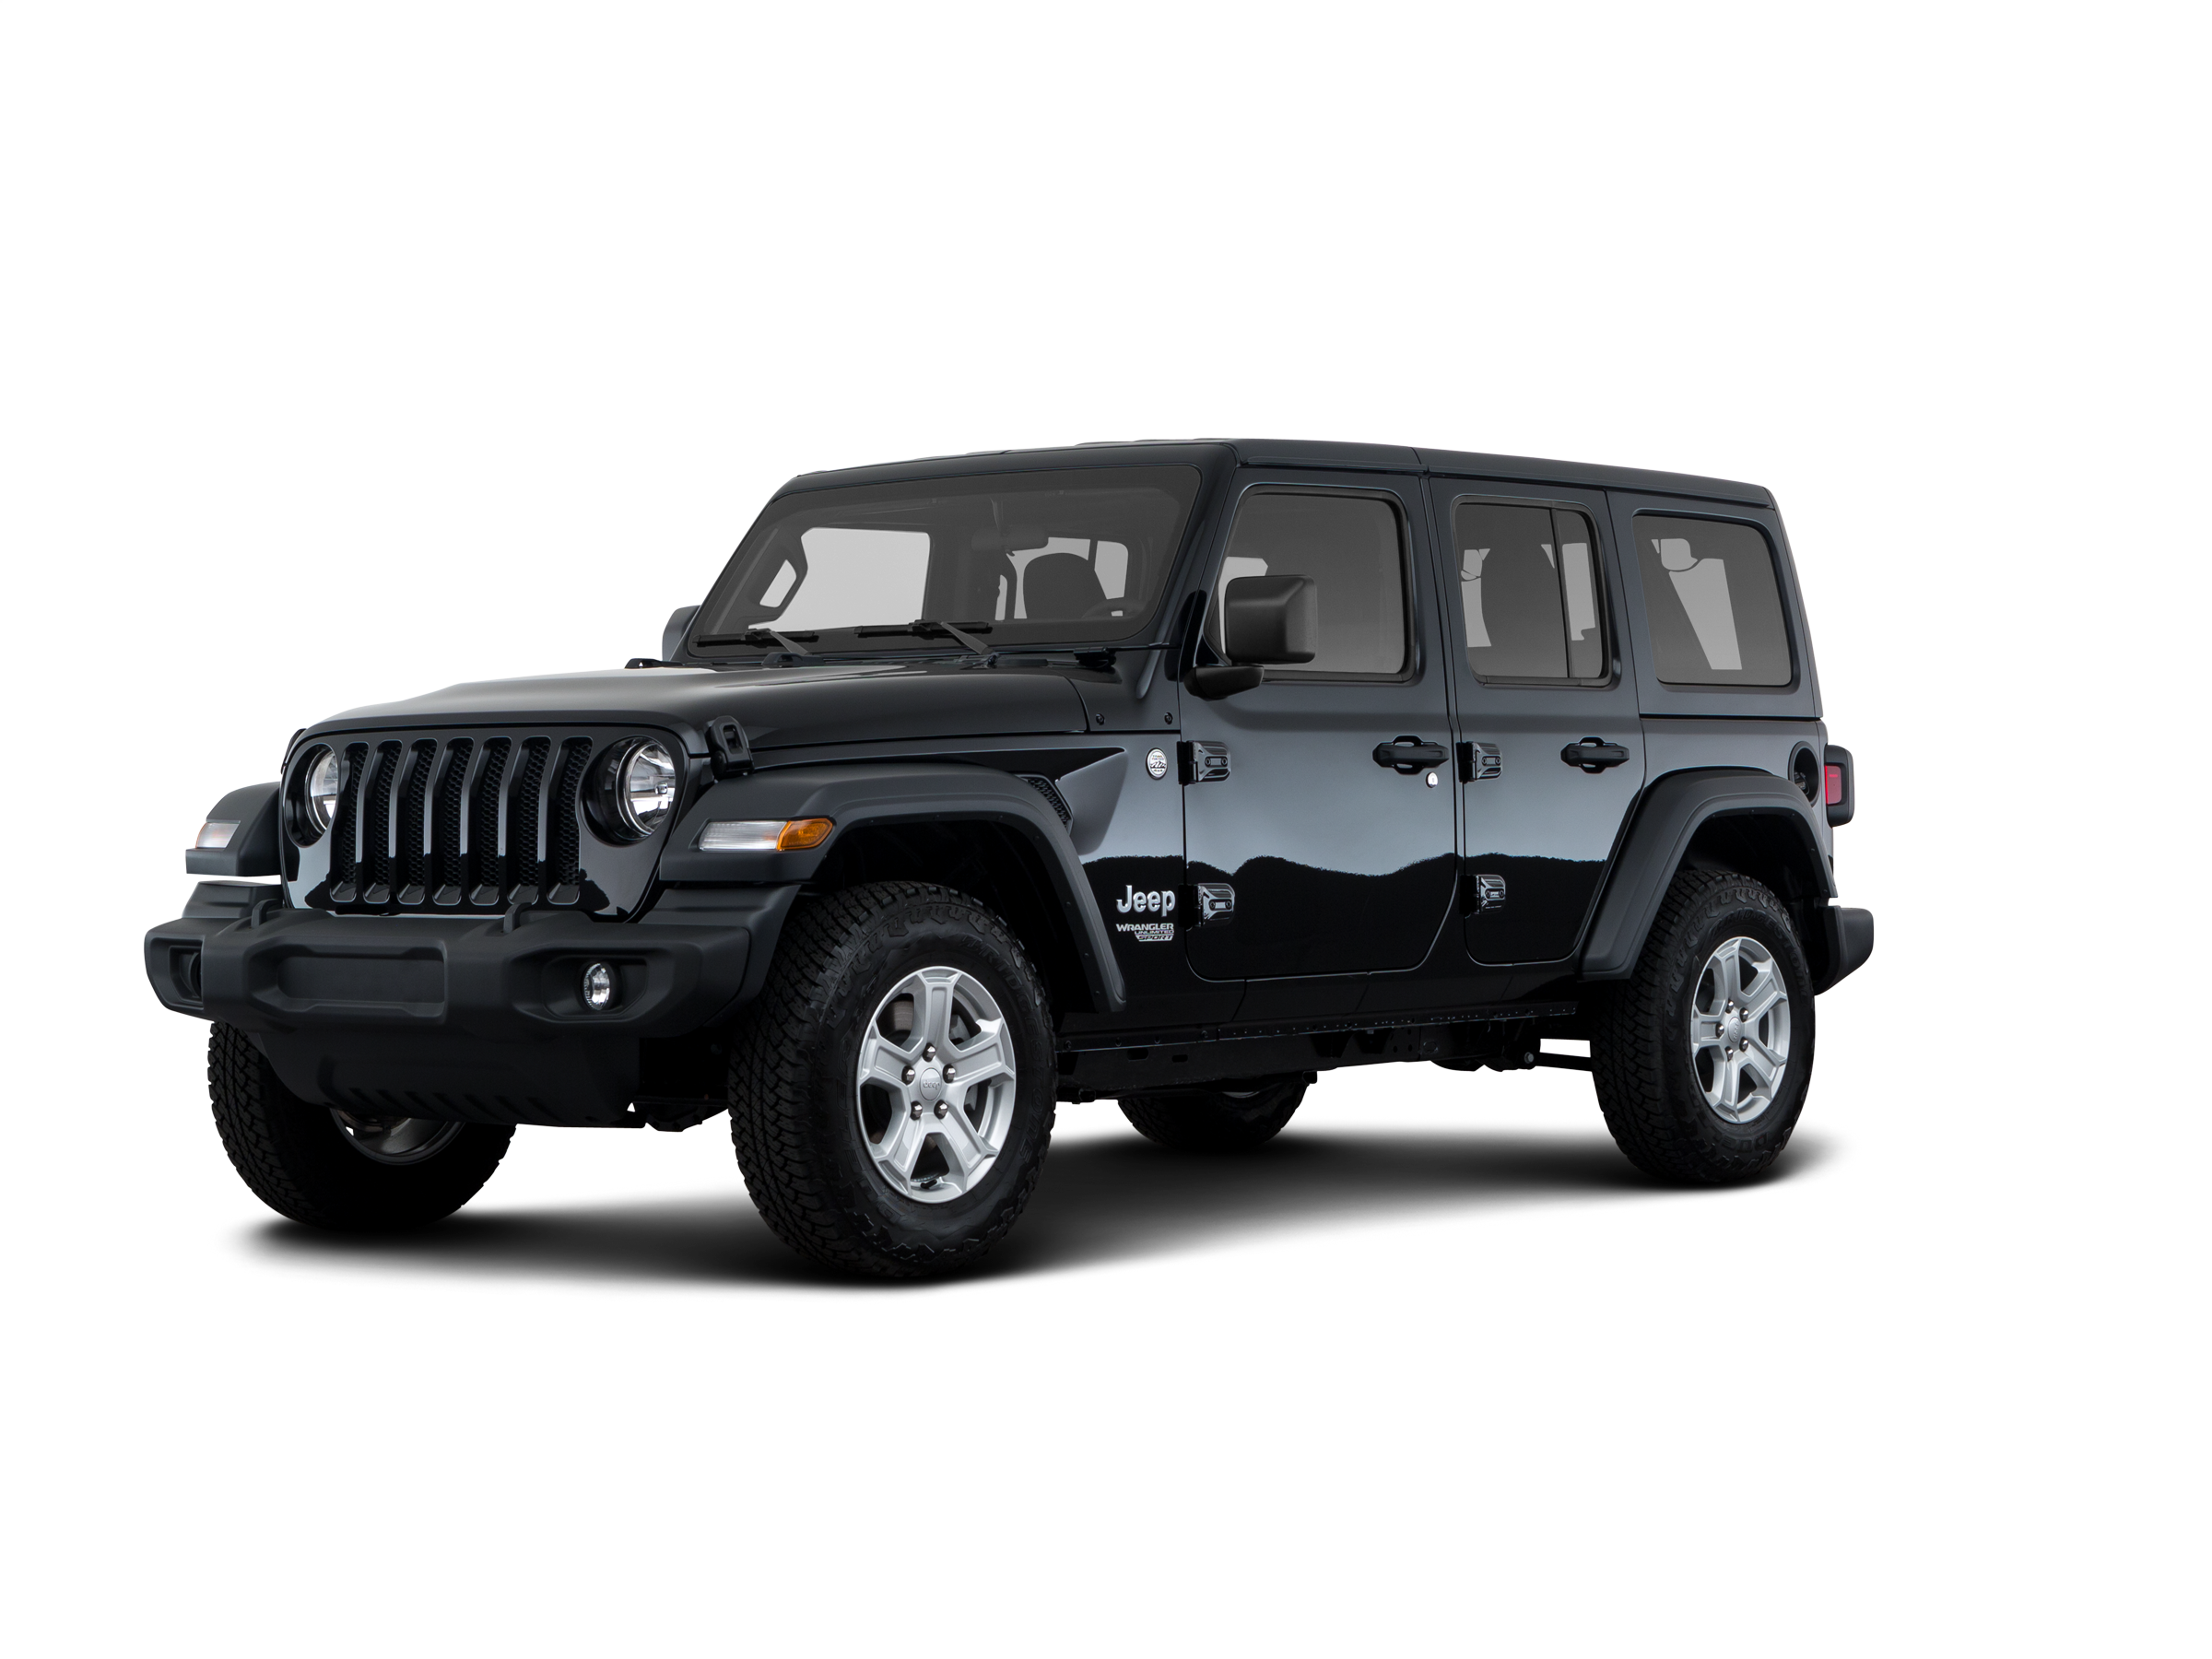 2020 Jeep Wrangler Unlimited Reviews, Pricing & Specs | Kelley Blue Book